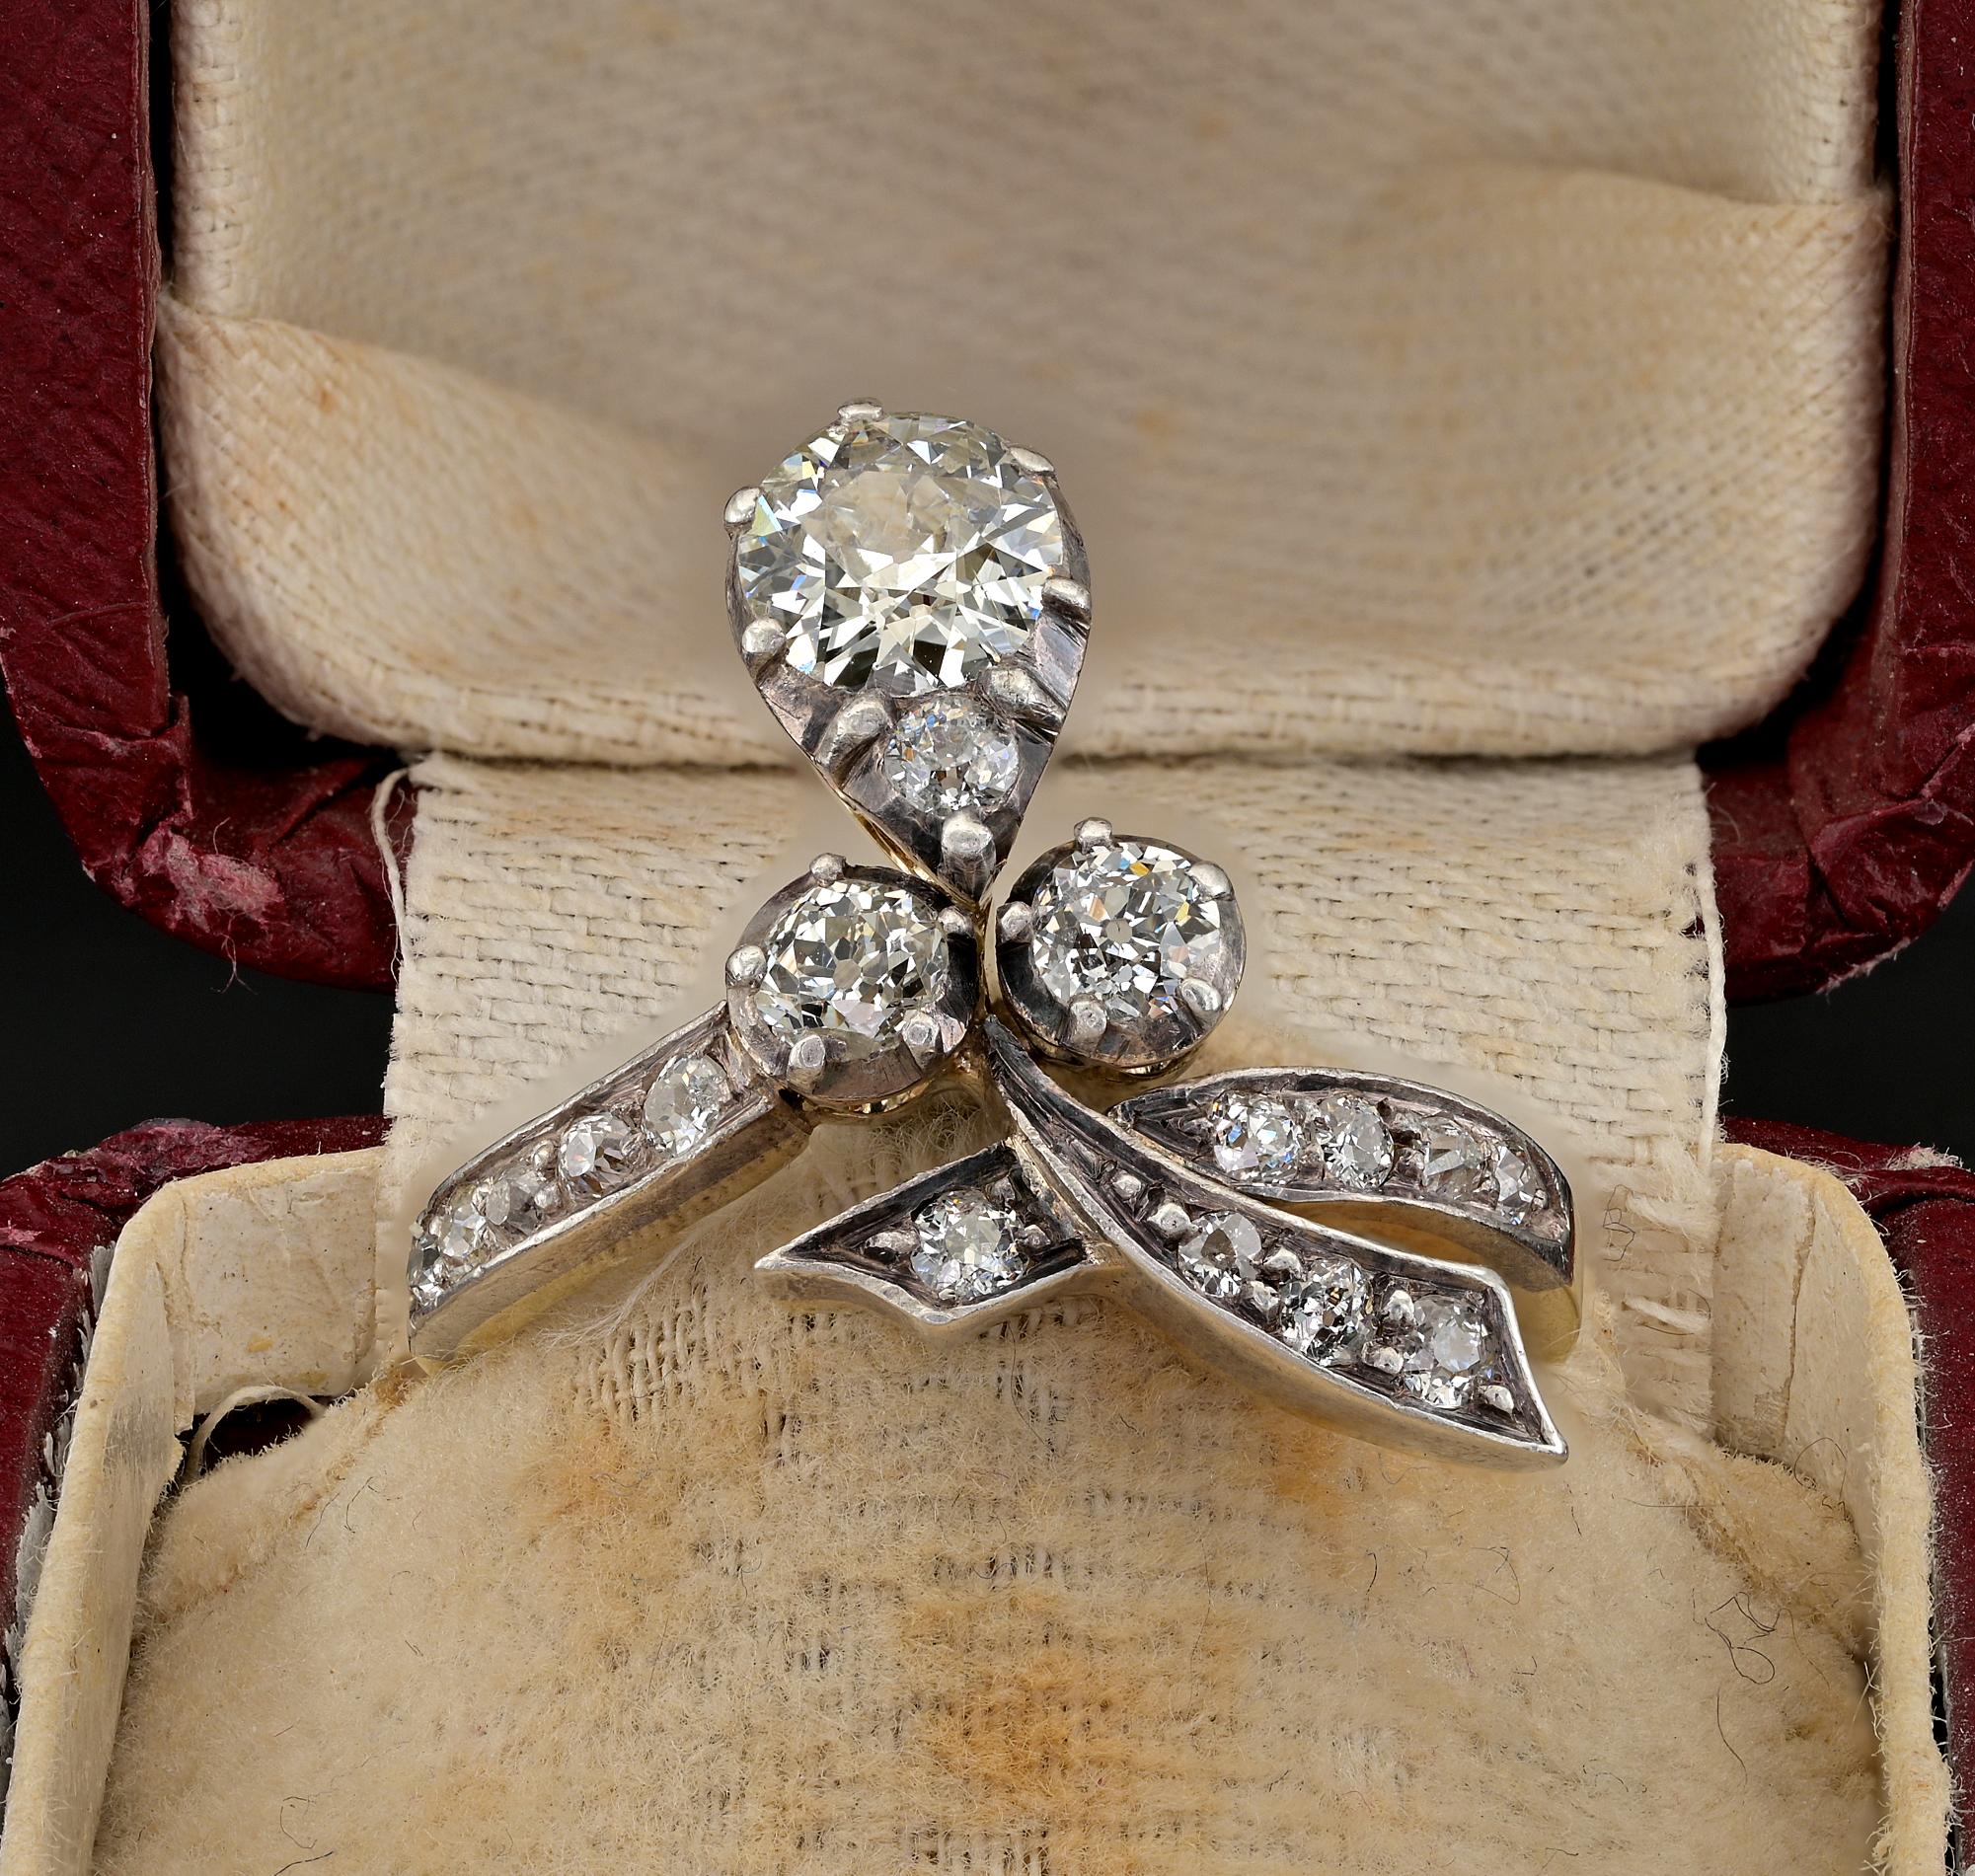 Epitome of pure Beauty and elegance Nature inspired, this rare, authentic art Nouveau ring is the expression of that era
This beautiful example is crafted of 18 KT solid gold with silver portion, dates 1890 ca
Larger Diamond is an old cut of .70 Ct